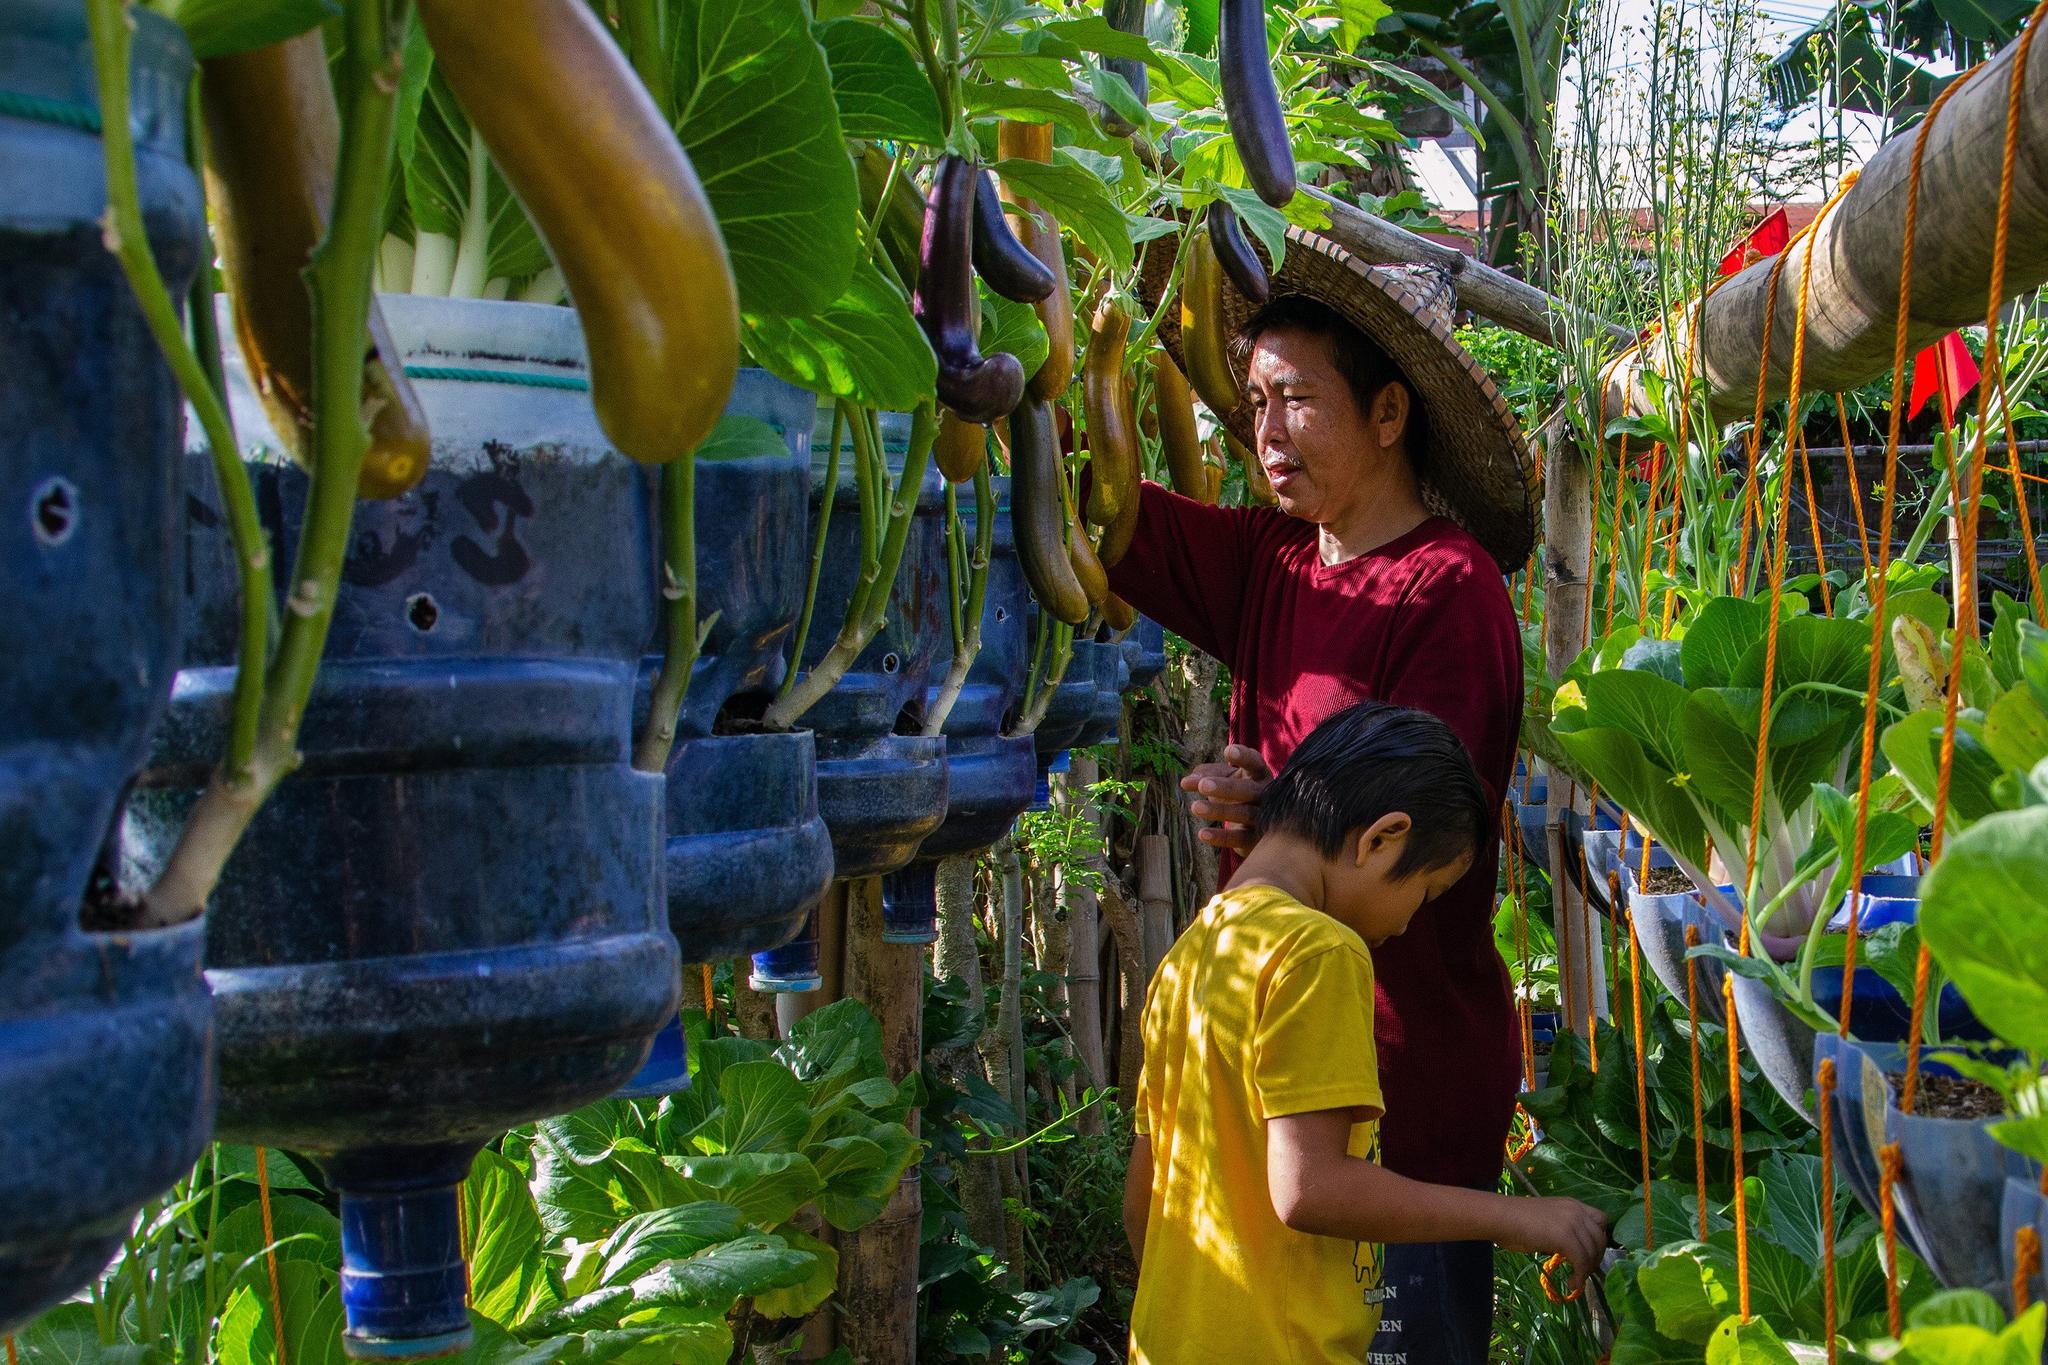 A man and a child look through hanging vegetables in a garden.